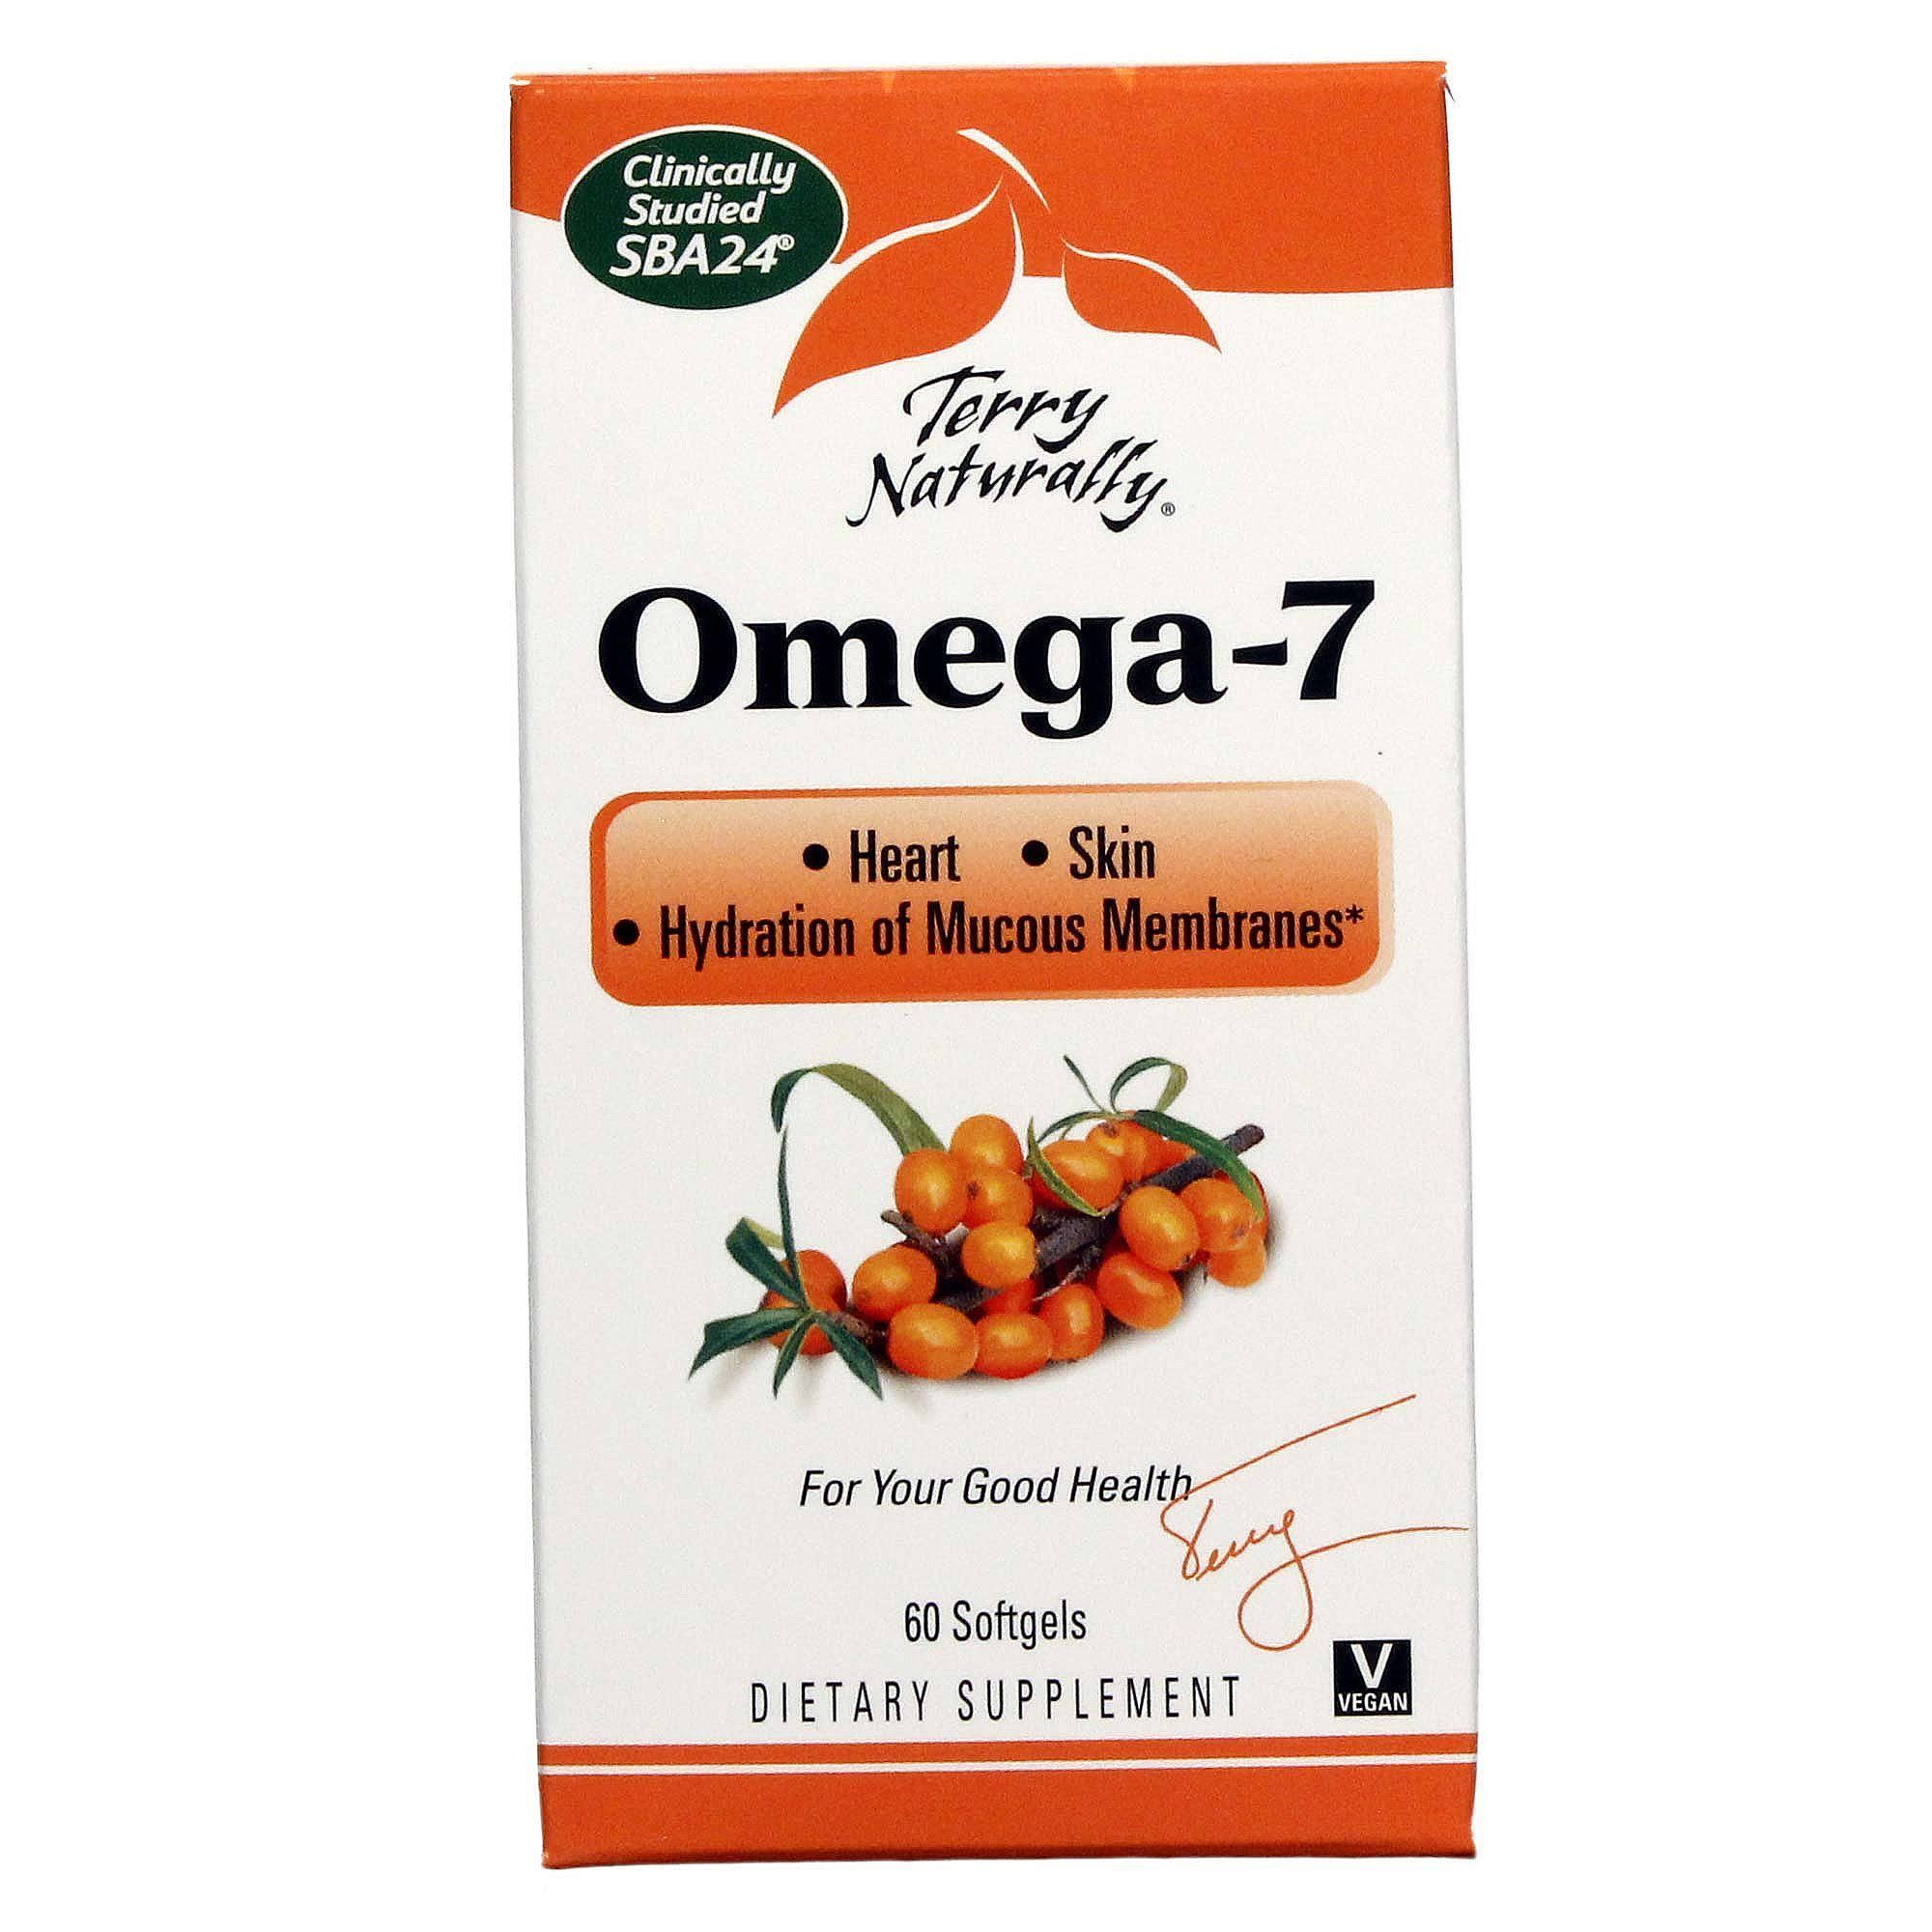 Terry Naturally Omega-7 - 60 Softgels